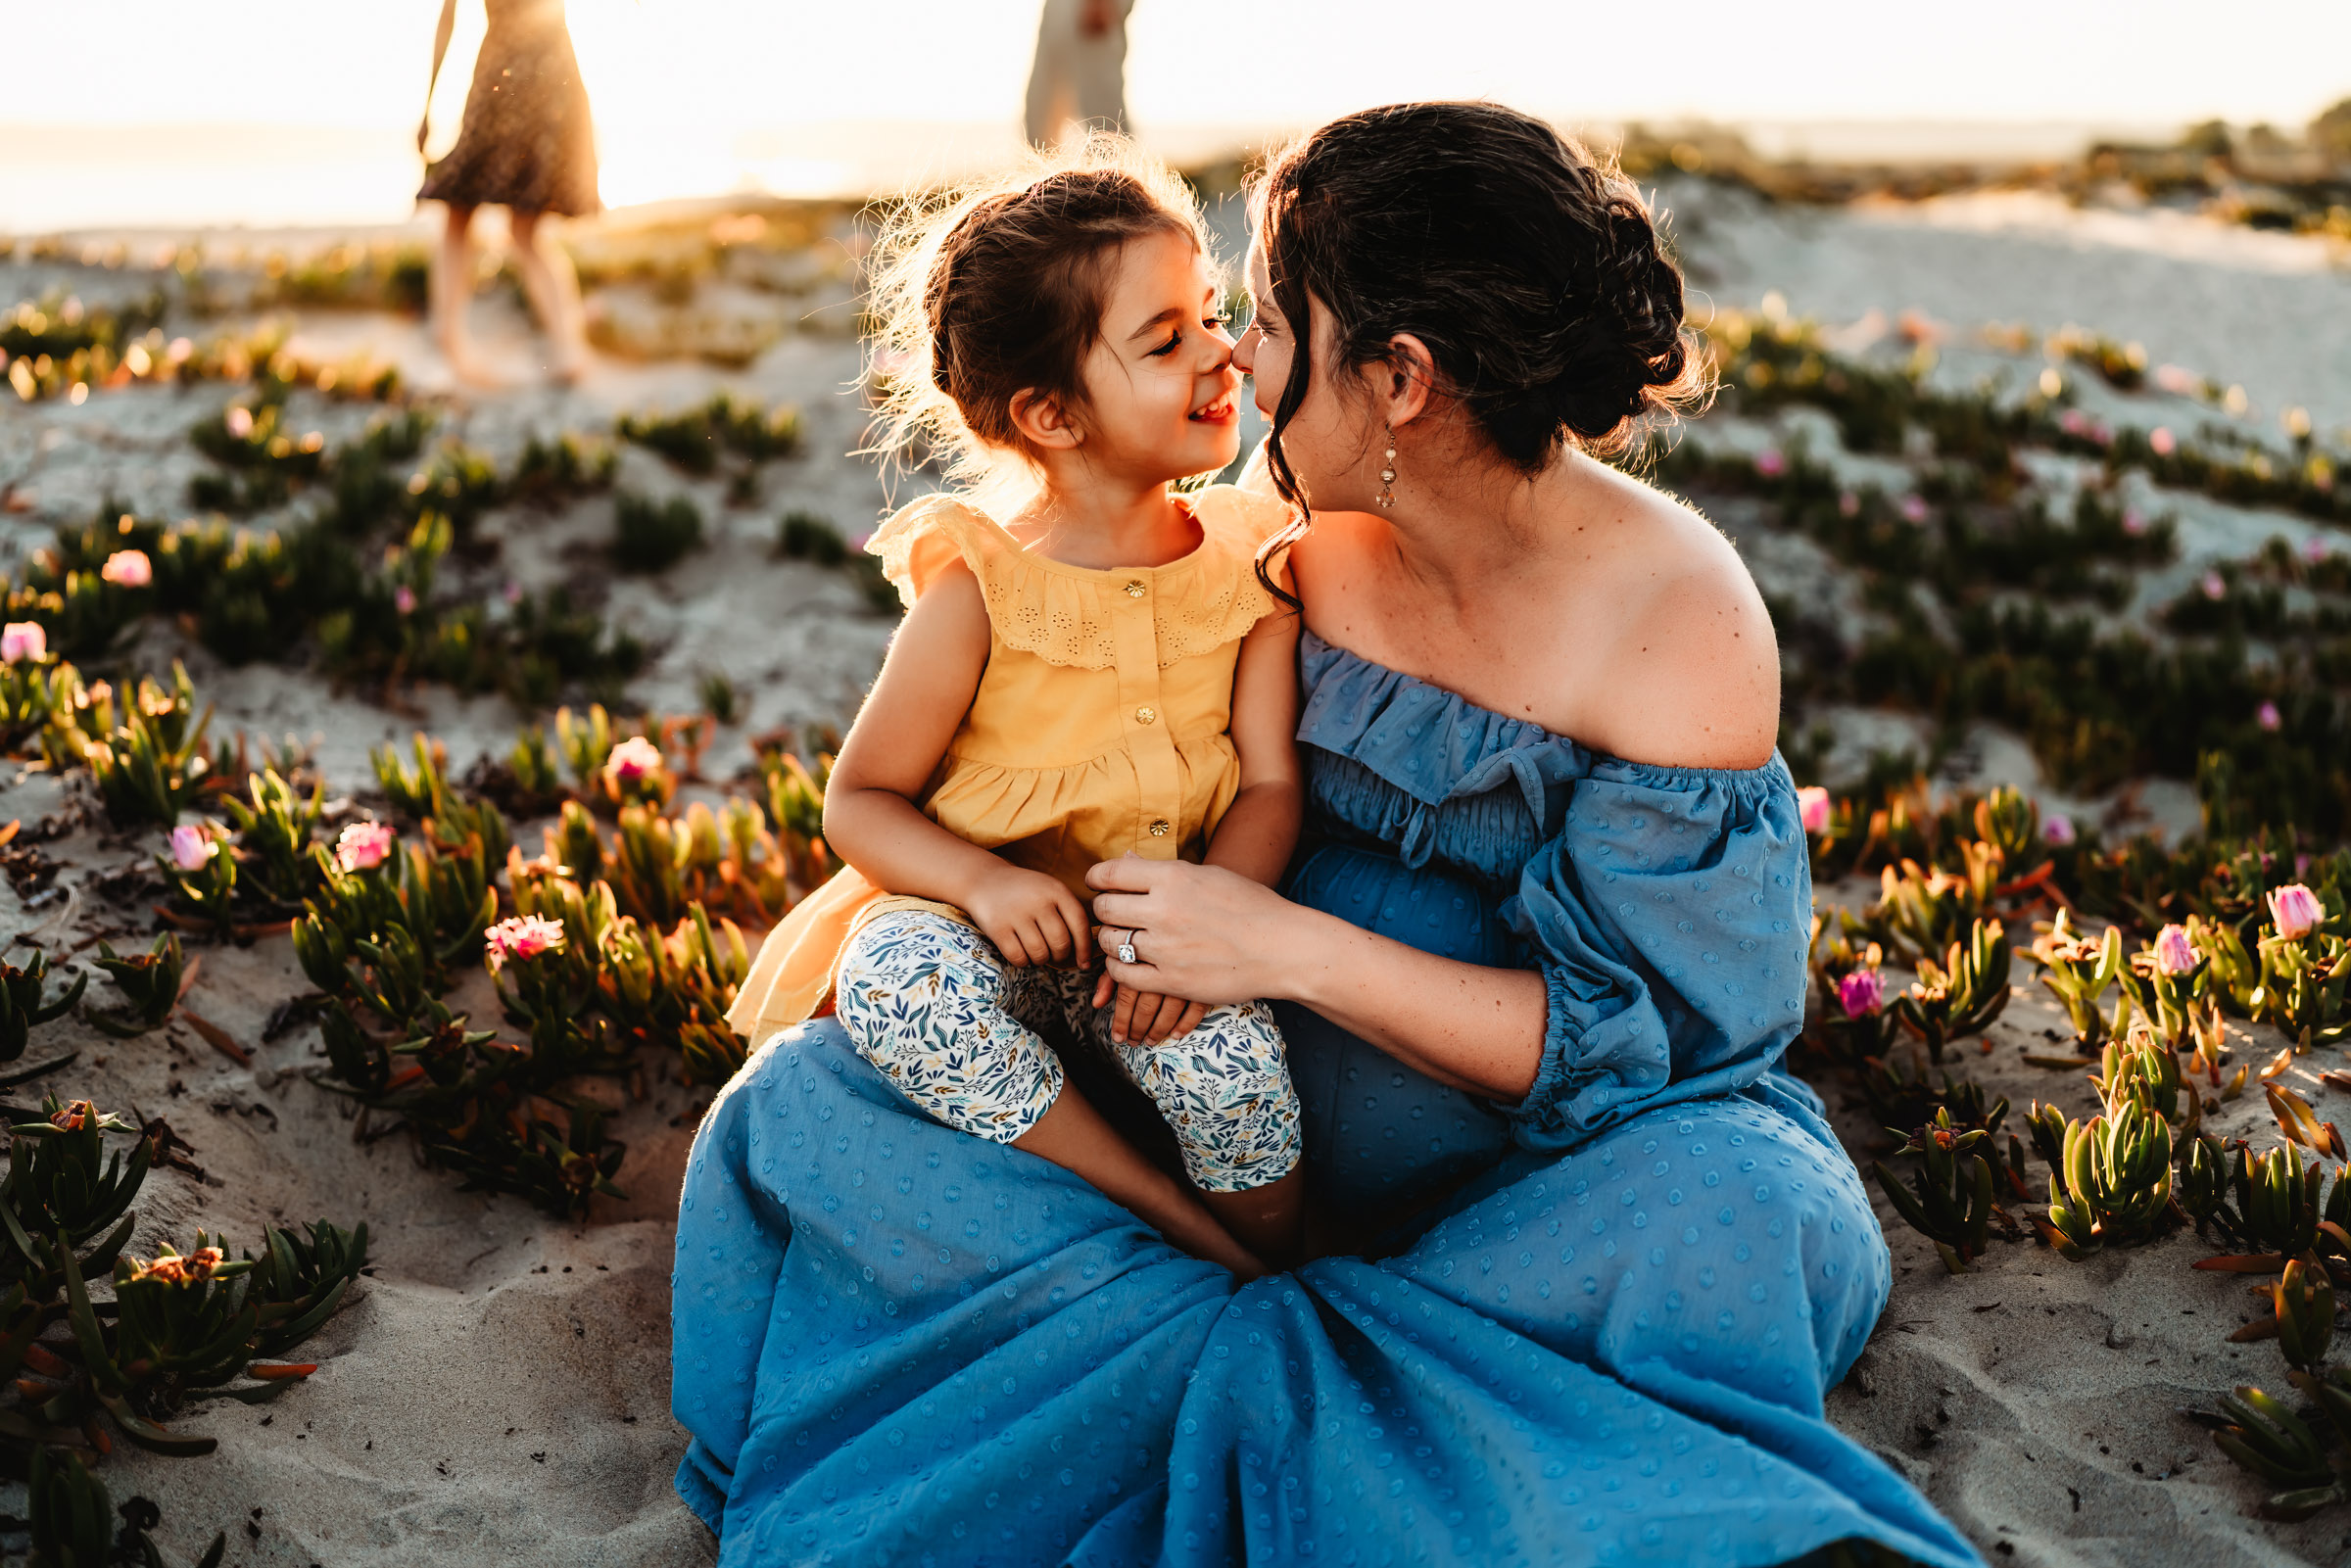 Pregnant woman sitting on a sand dune holding her daughter on her lap during a lifestyle maternity photo session on Coronado Beach.